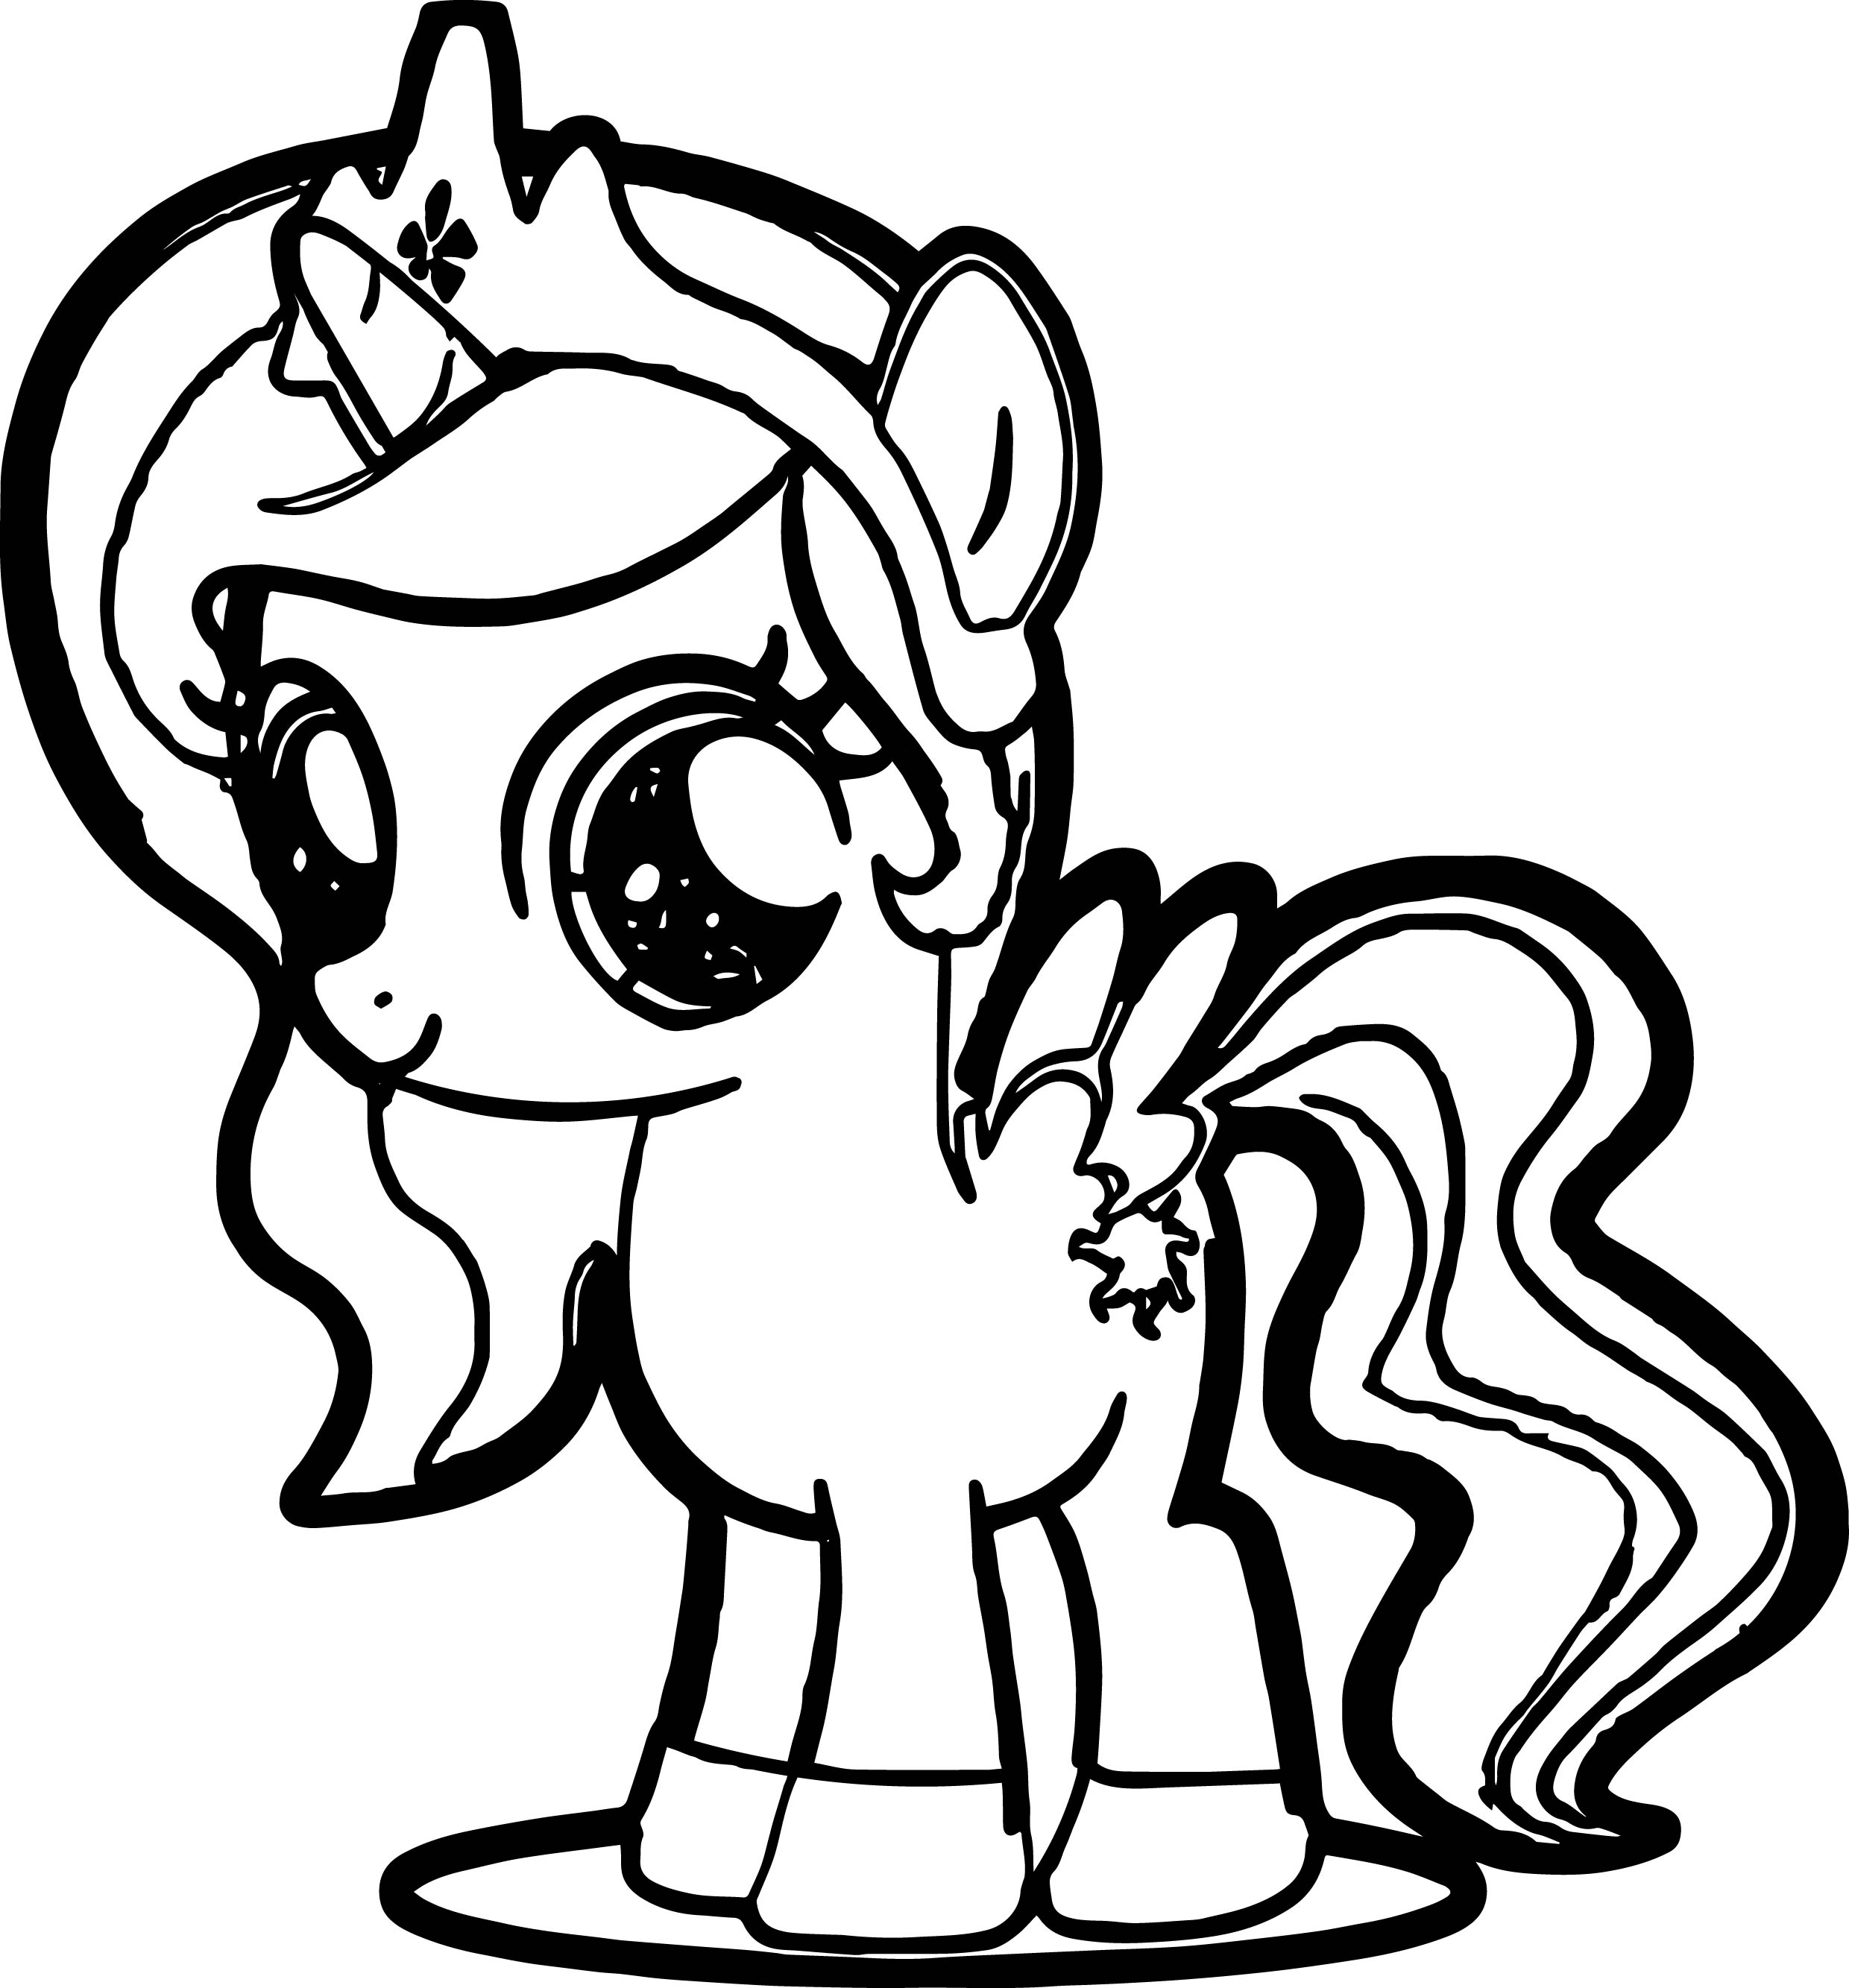 my-little-pony-scootaloo-coloring-pages-at-getcolorings-free